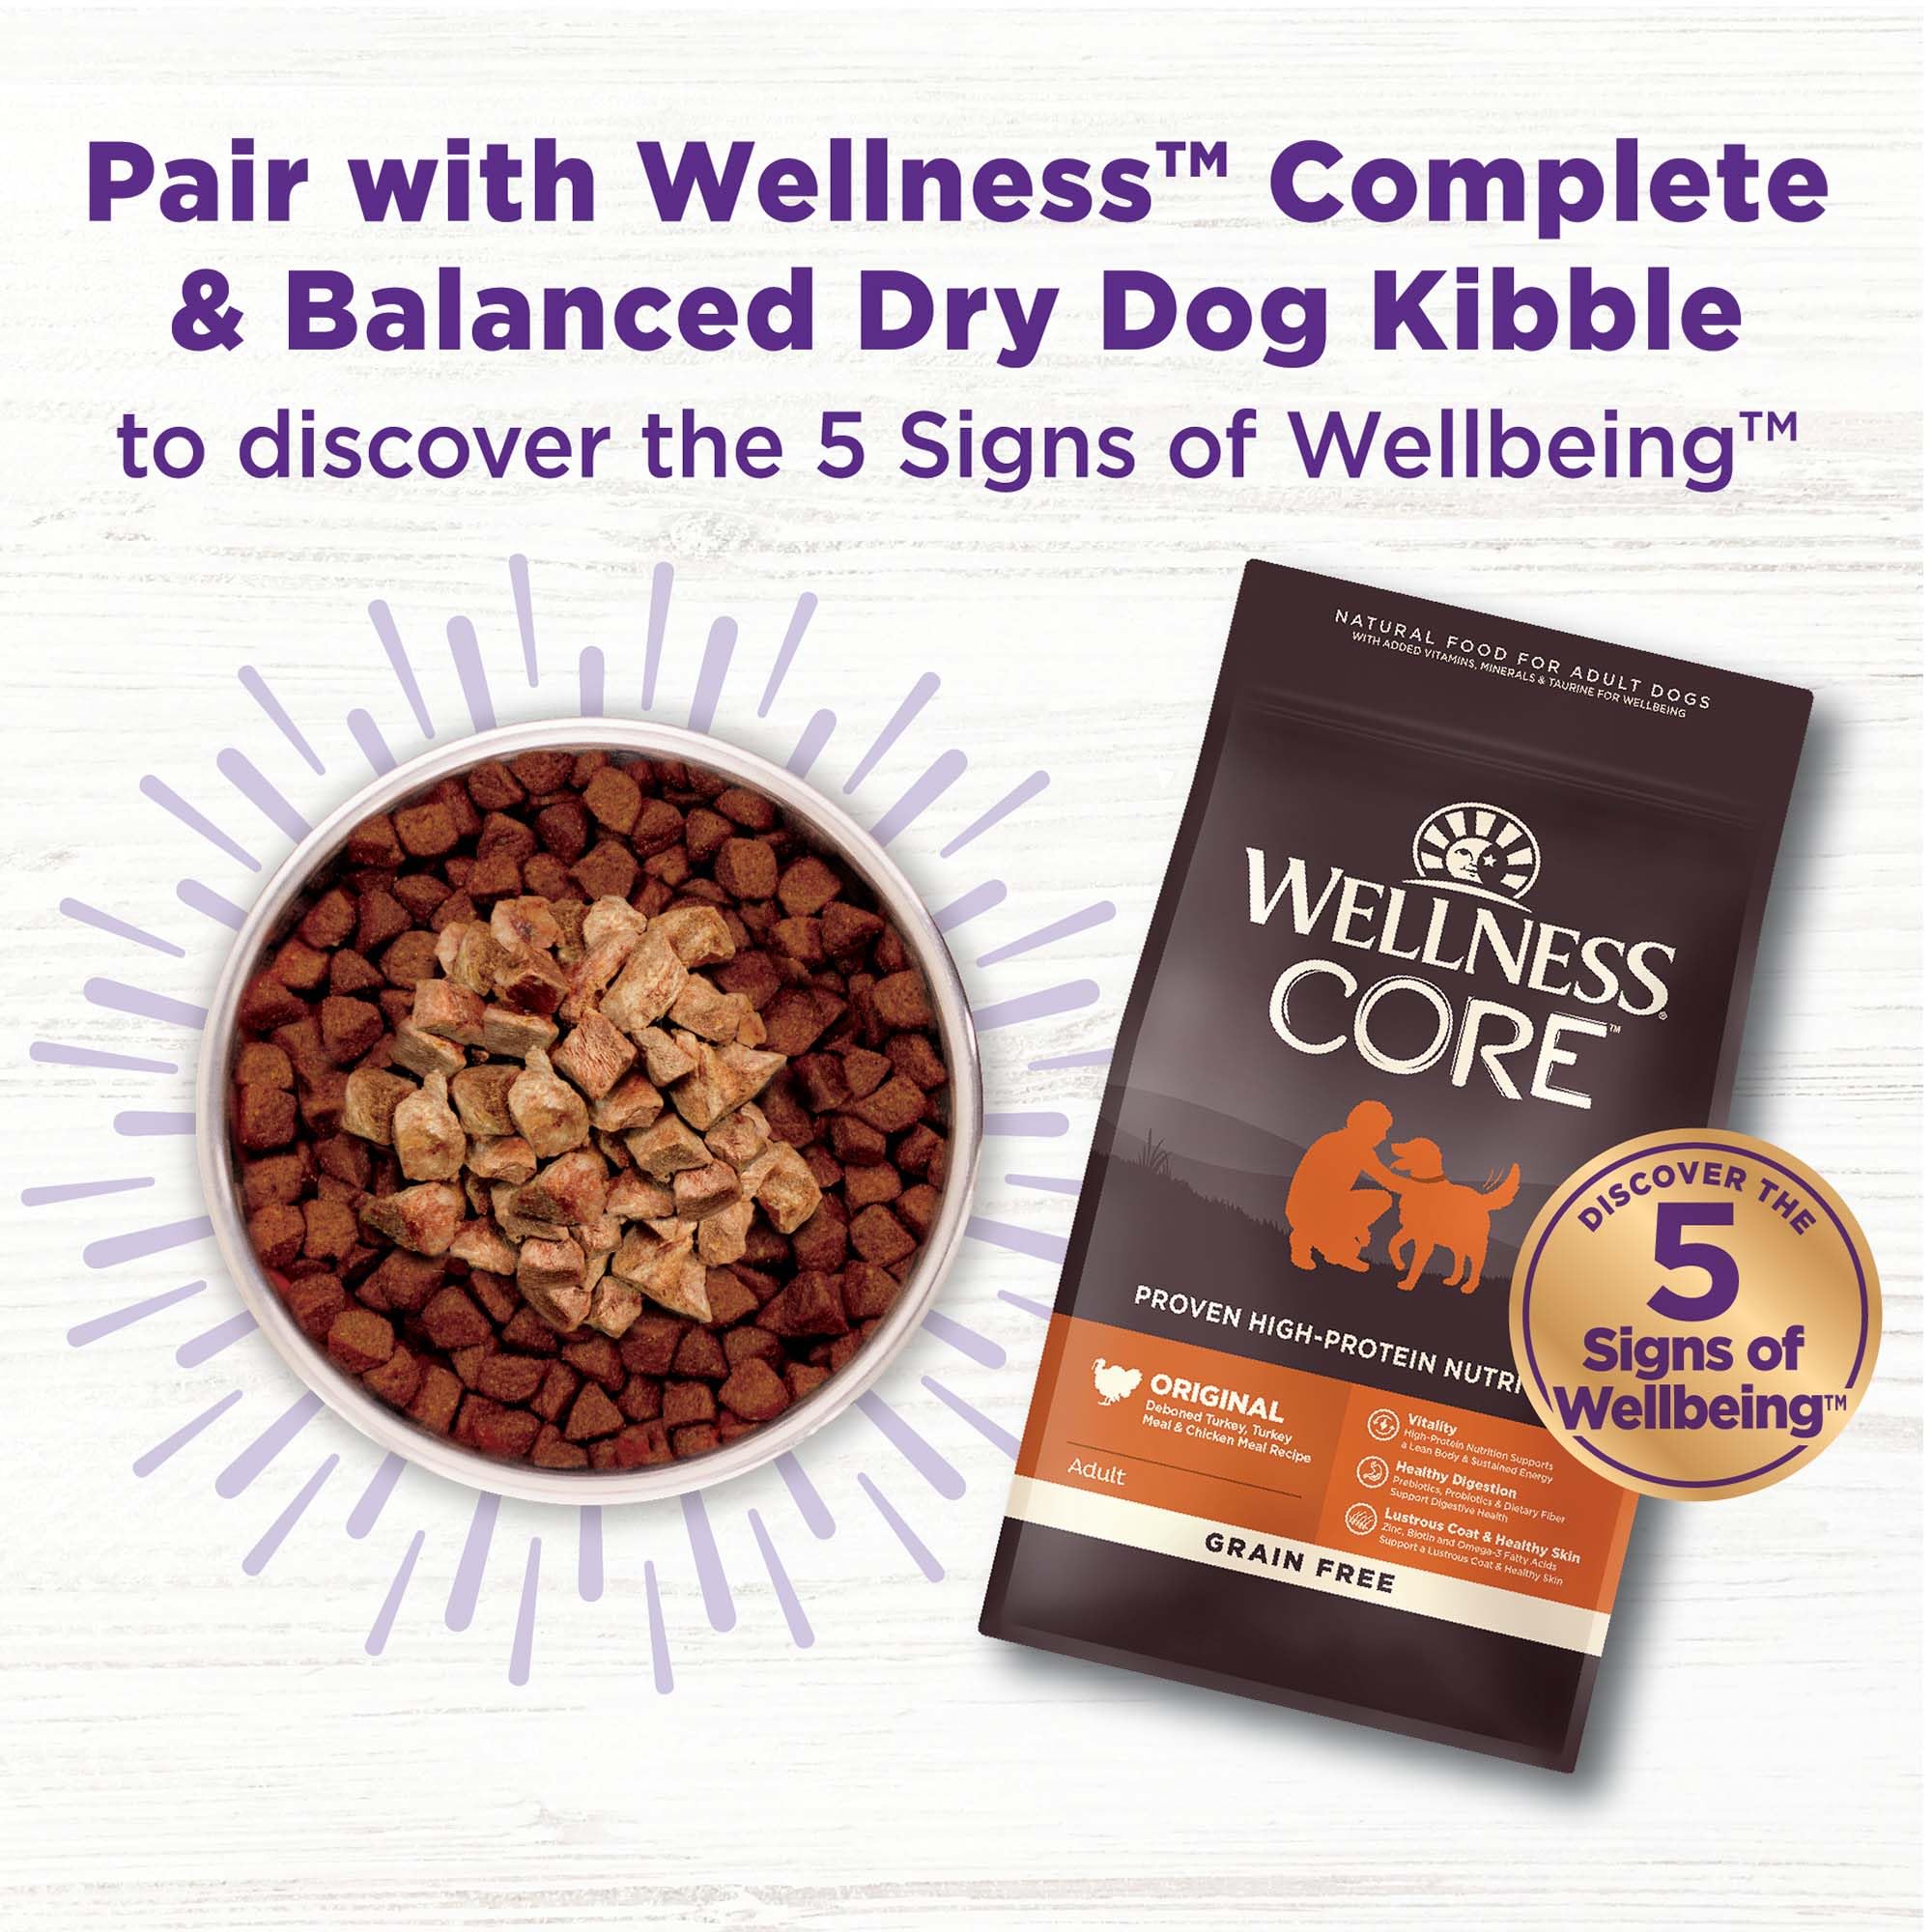 Wellness Core Bowl Boosters Grain-Free Freeze-Dried Turkey Wet Dog Food Topper or Mixer Pouch - 4 Oz - Case of 6  